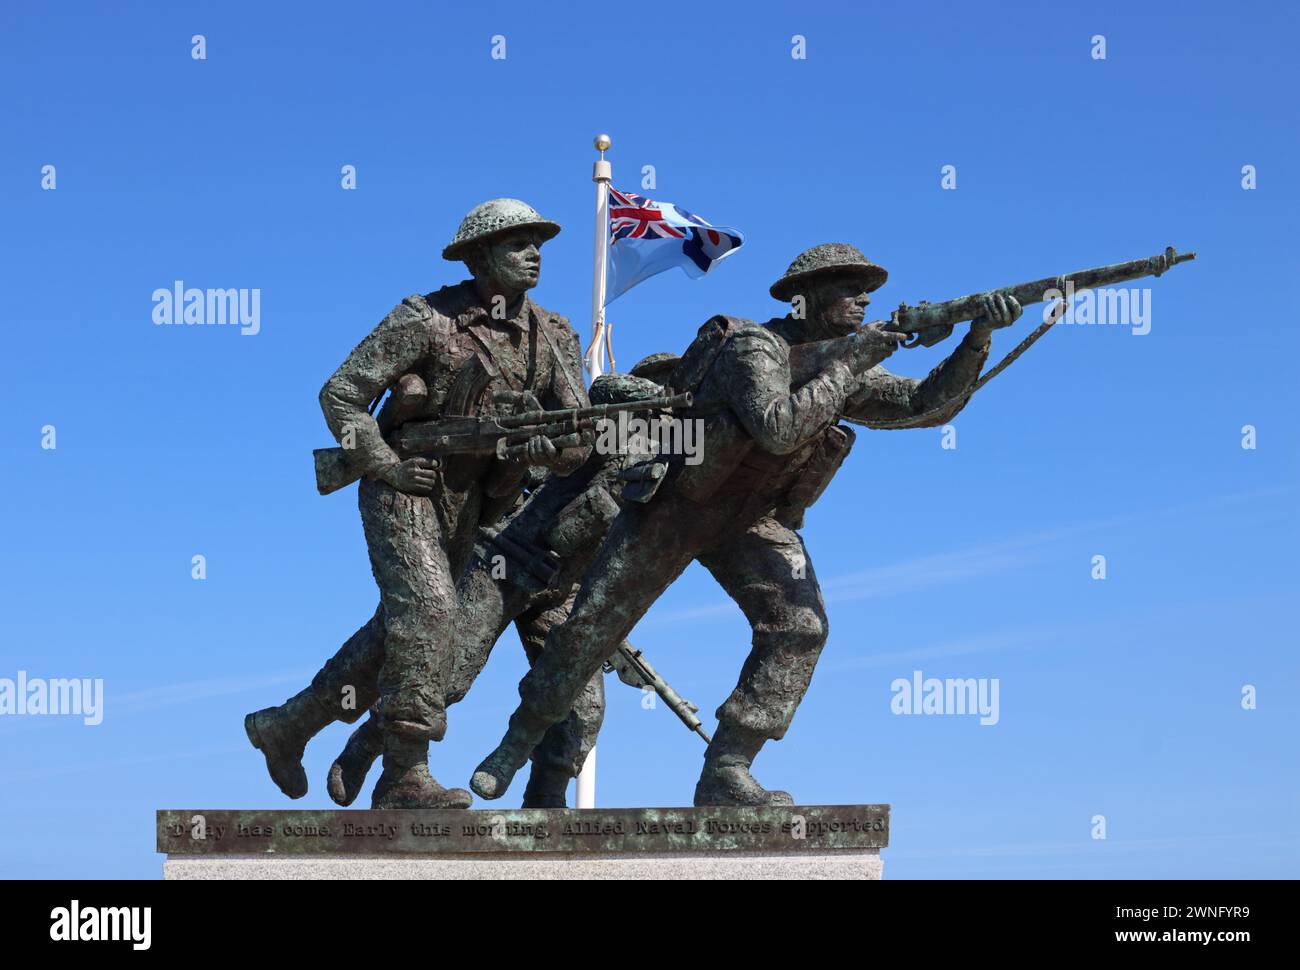 The British Normandy Memorial, Ver-sur-Mer, France remembers those lost on D-Day in WW2. Stock Photo